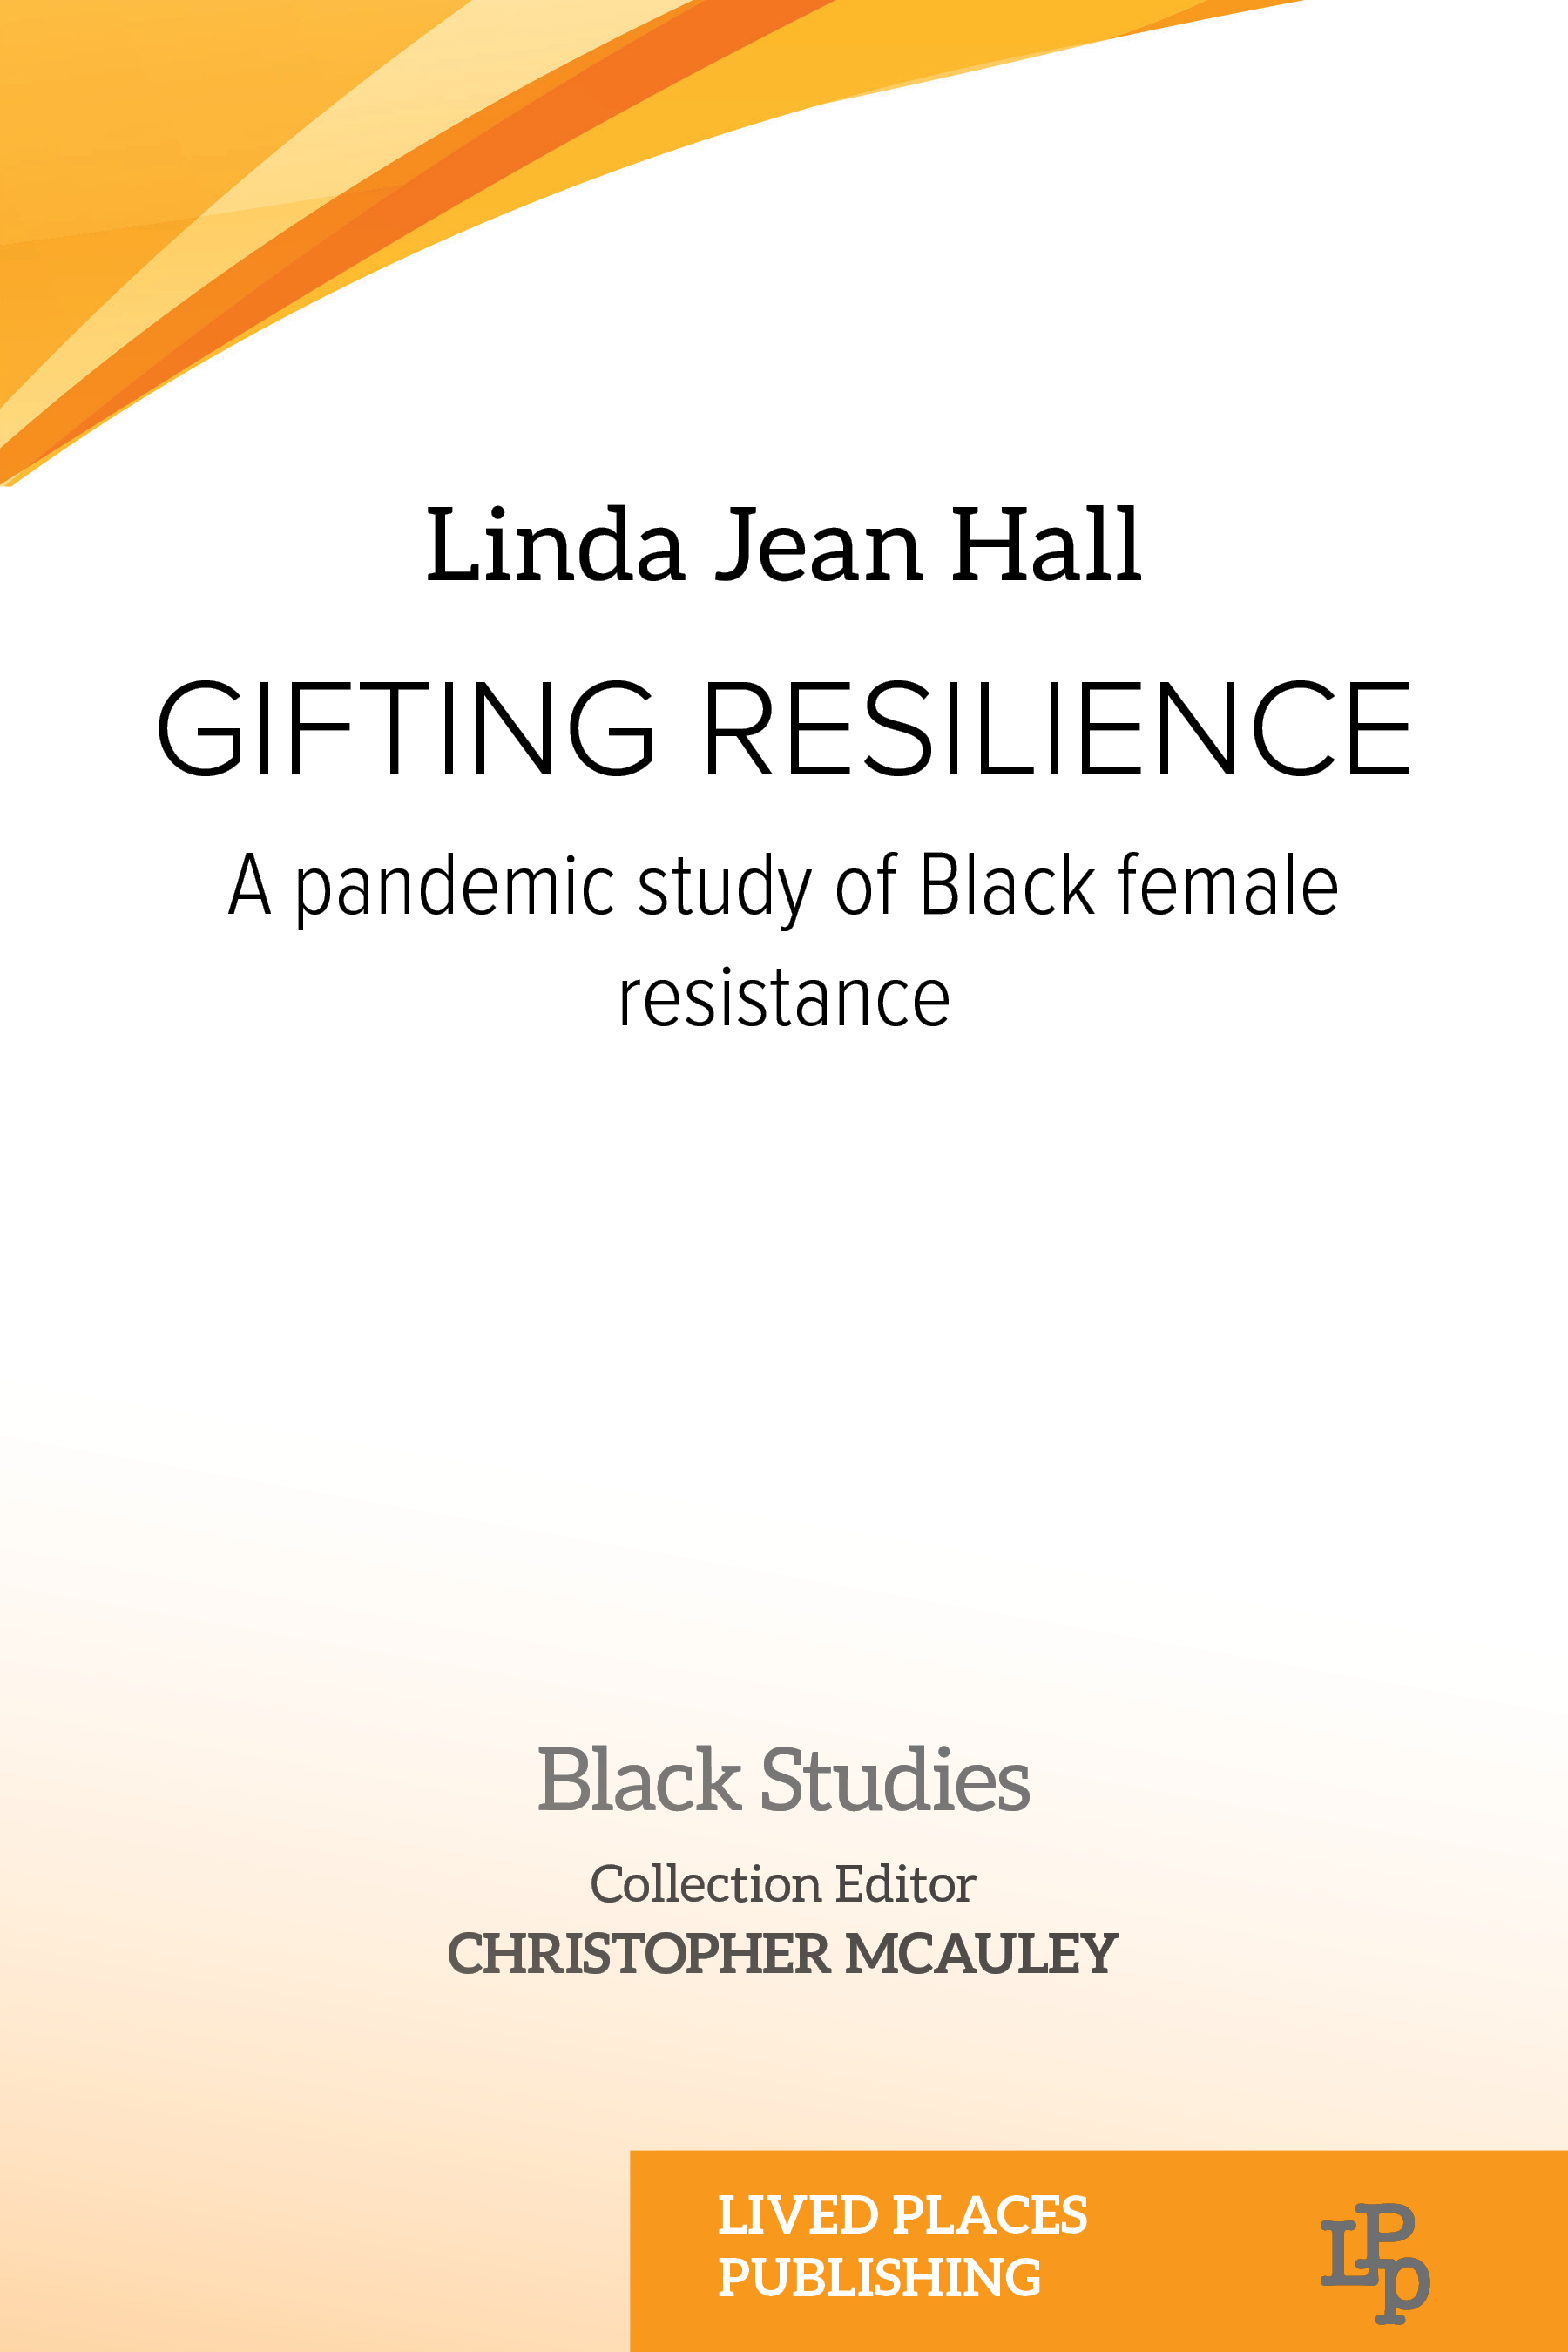 The front cover of Gifting Resilience by Linda Jean Hall